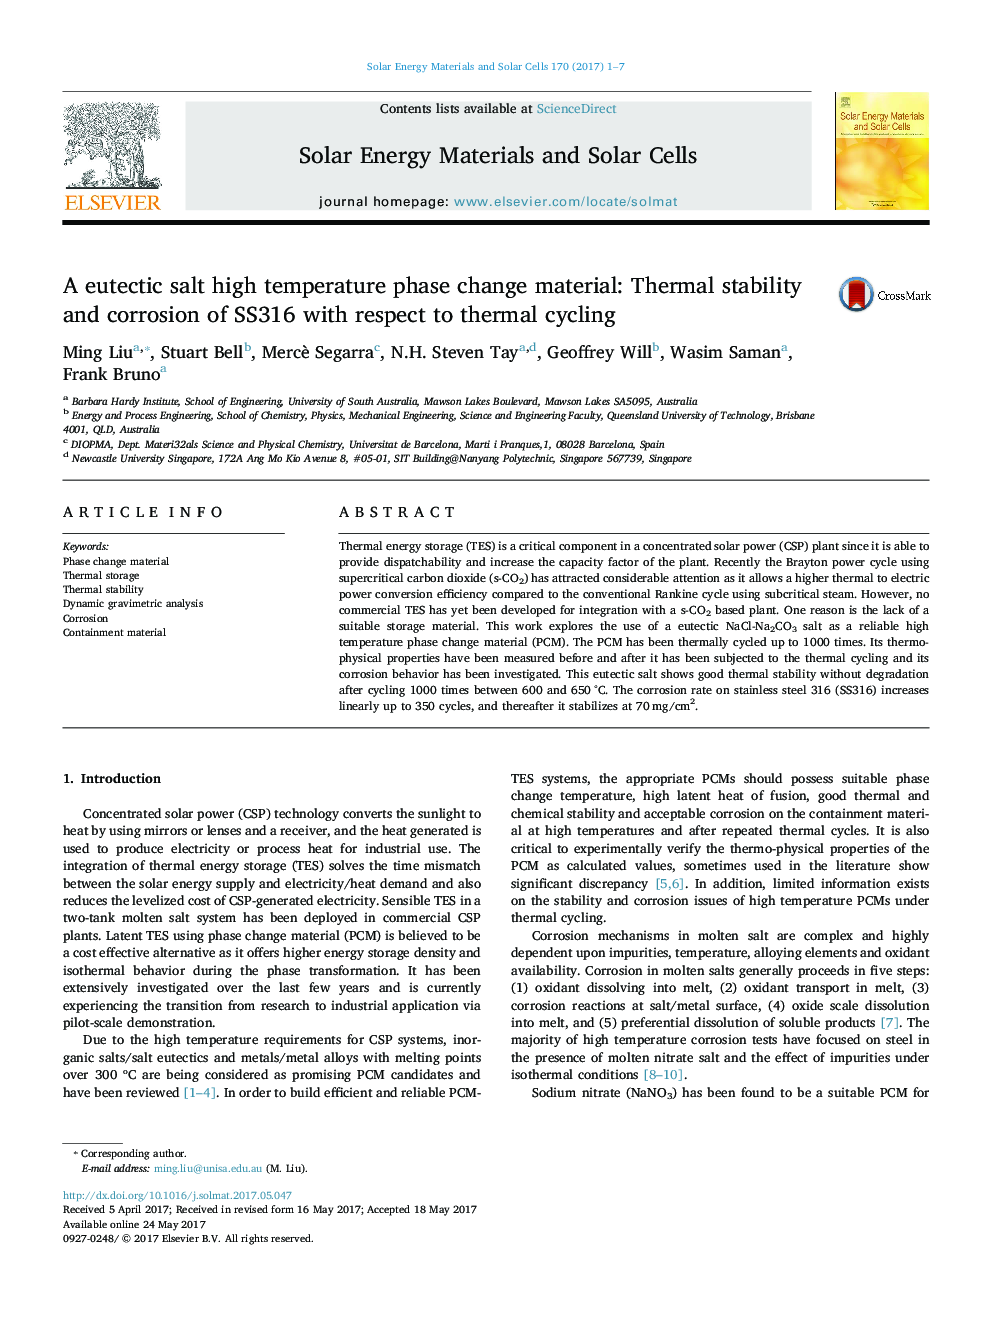 A eutectic salt high temperature phase change material: Thermal stability and corrosion of SS316 with respect to thermal cycling